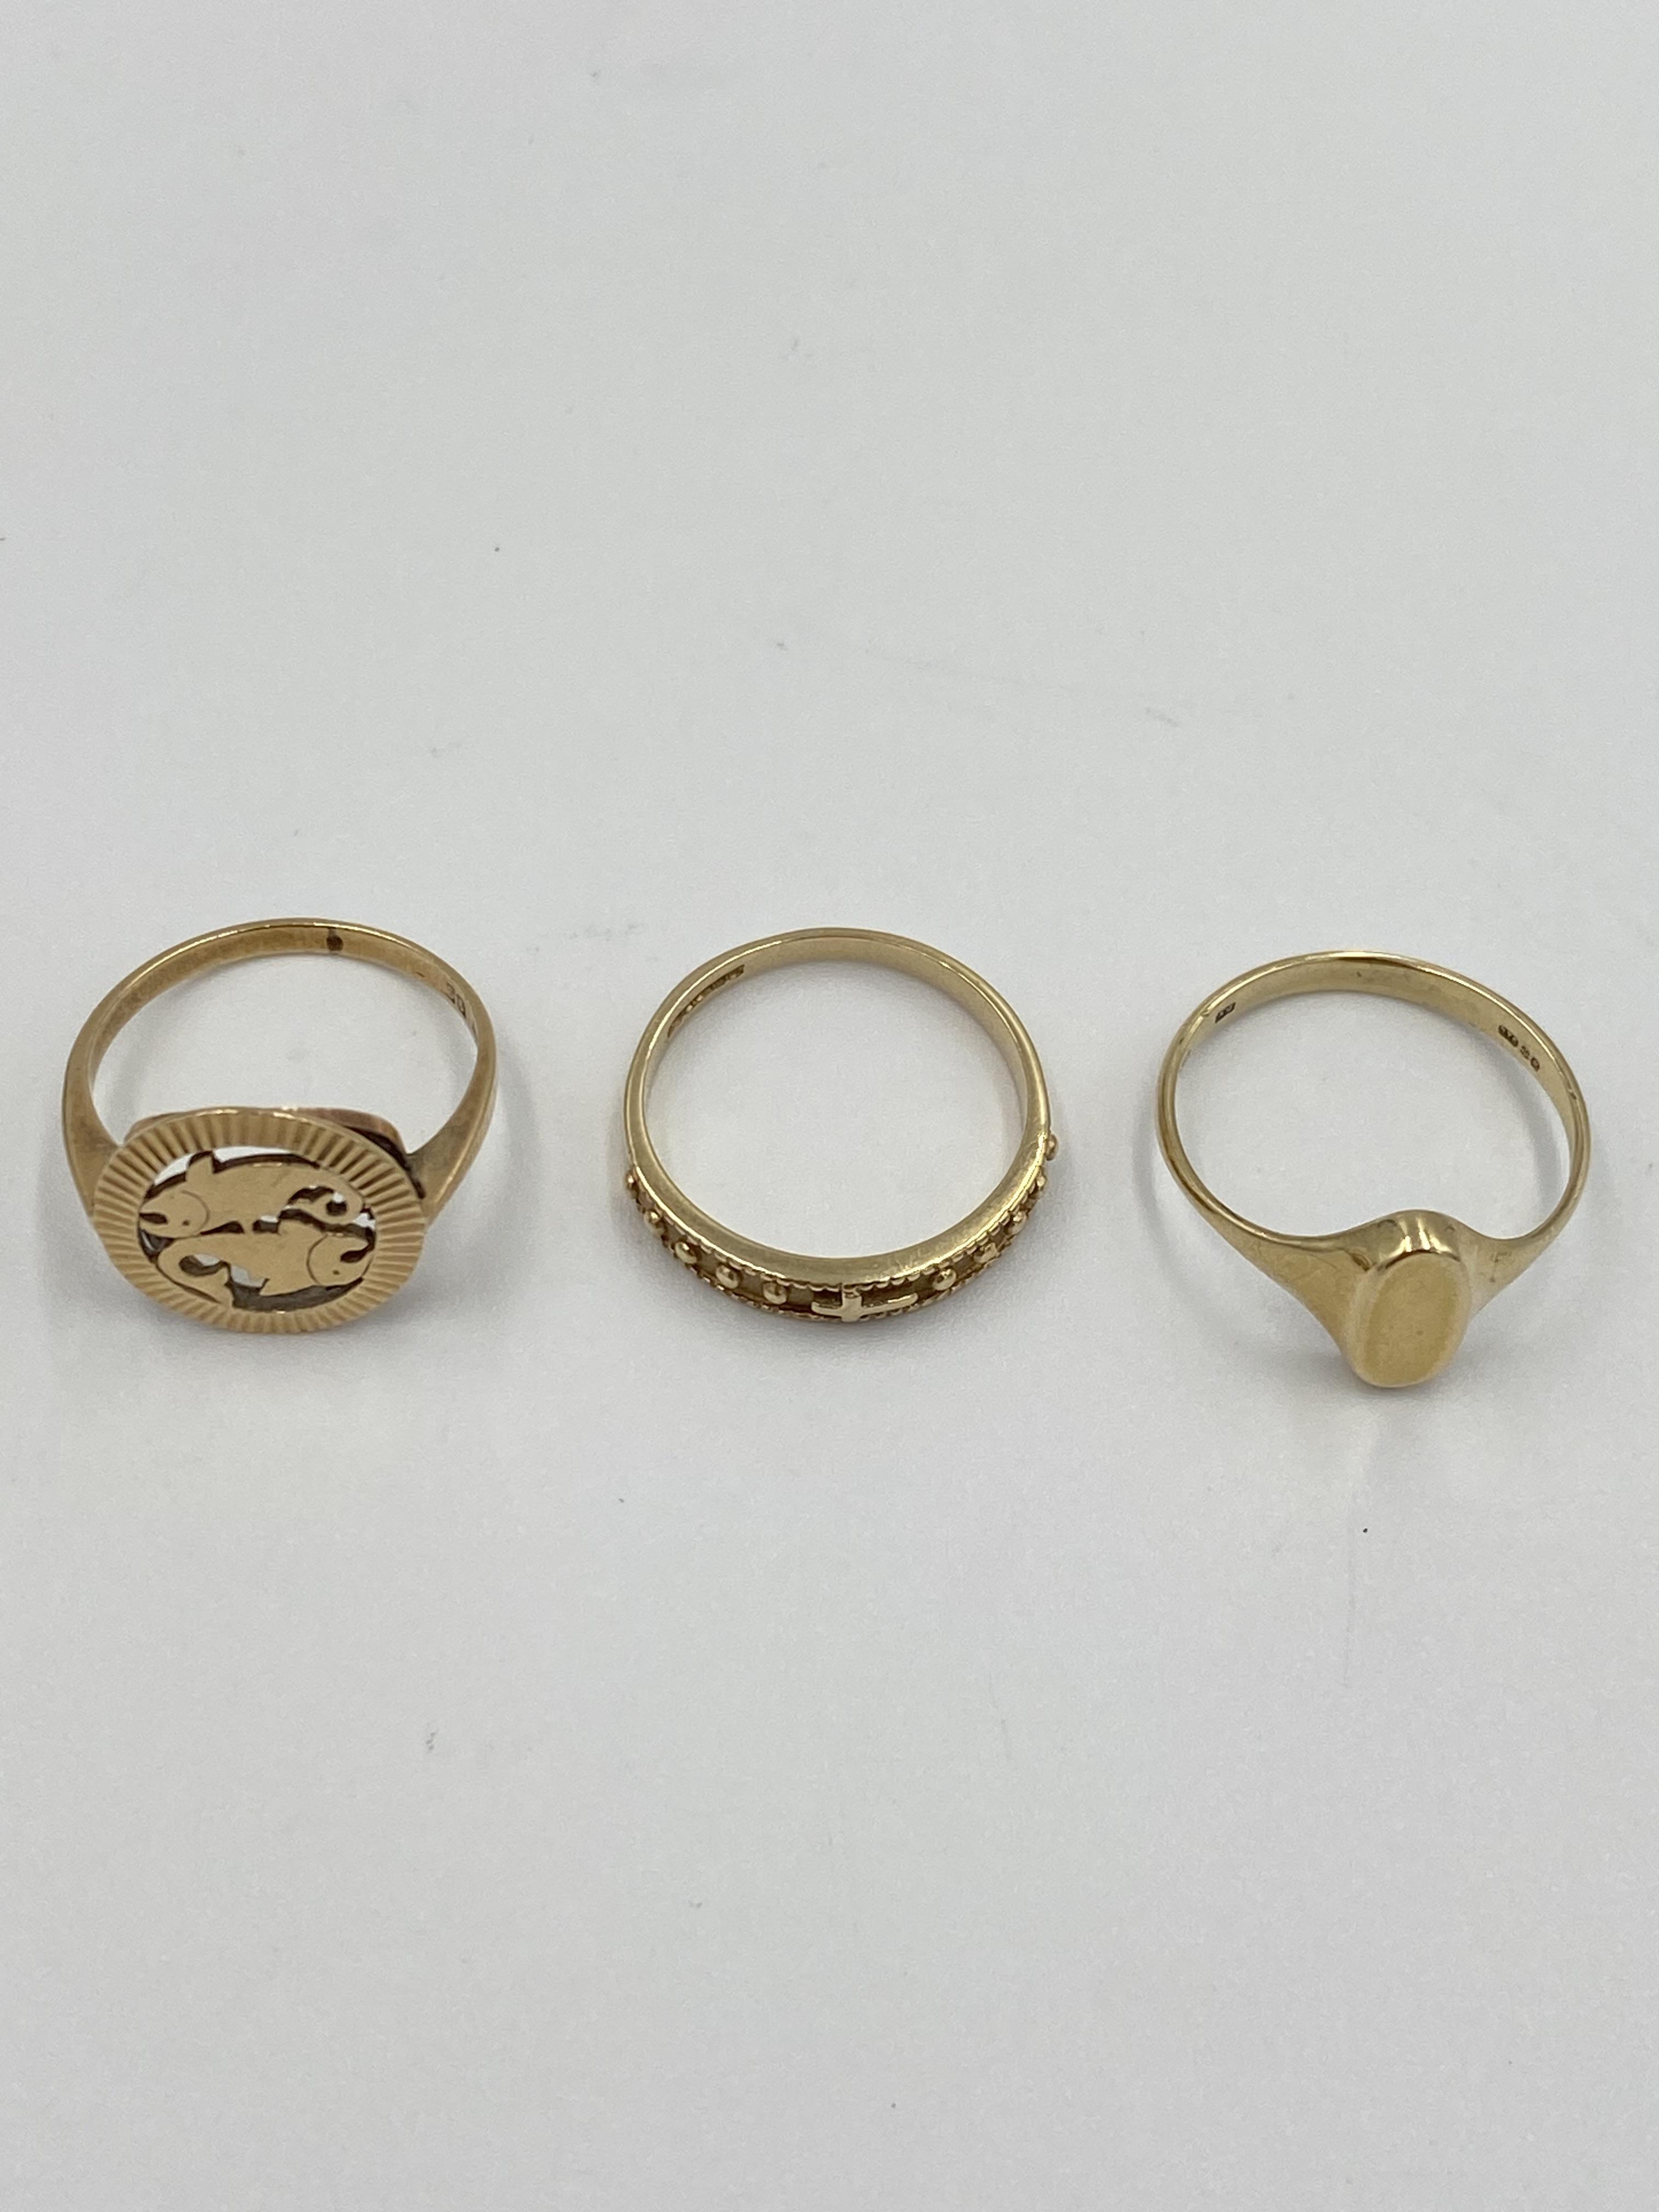 Three 9ct gold rings - Image 6 of 6